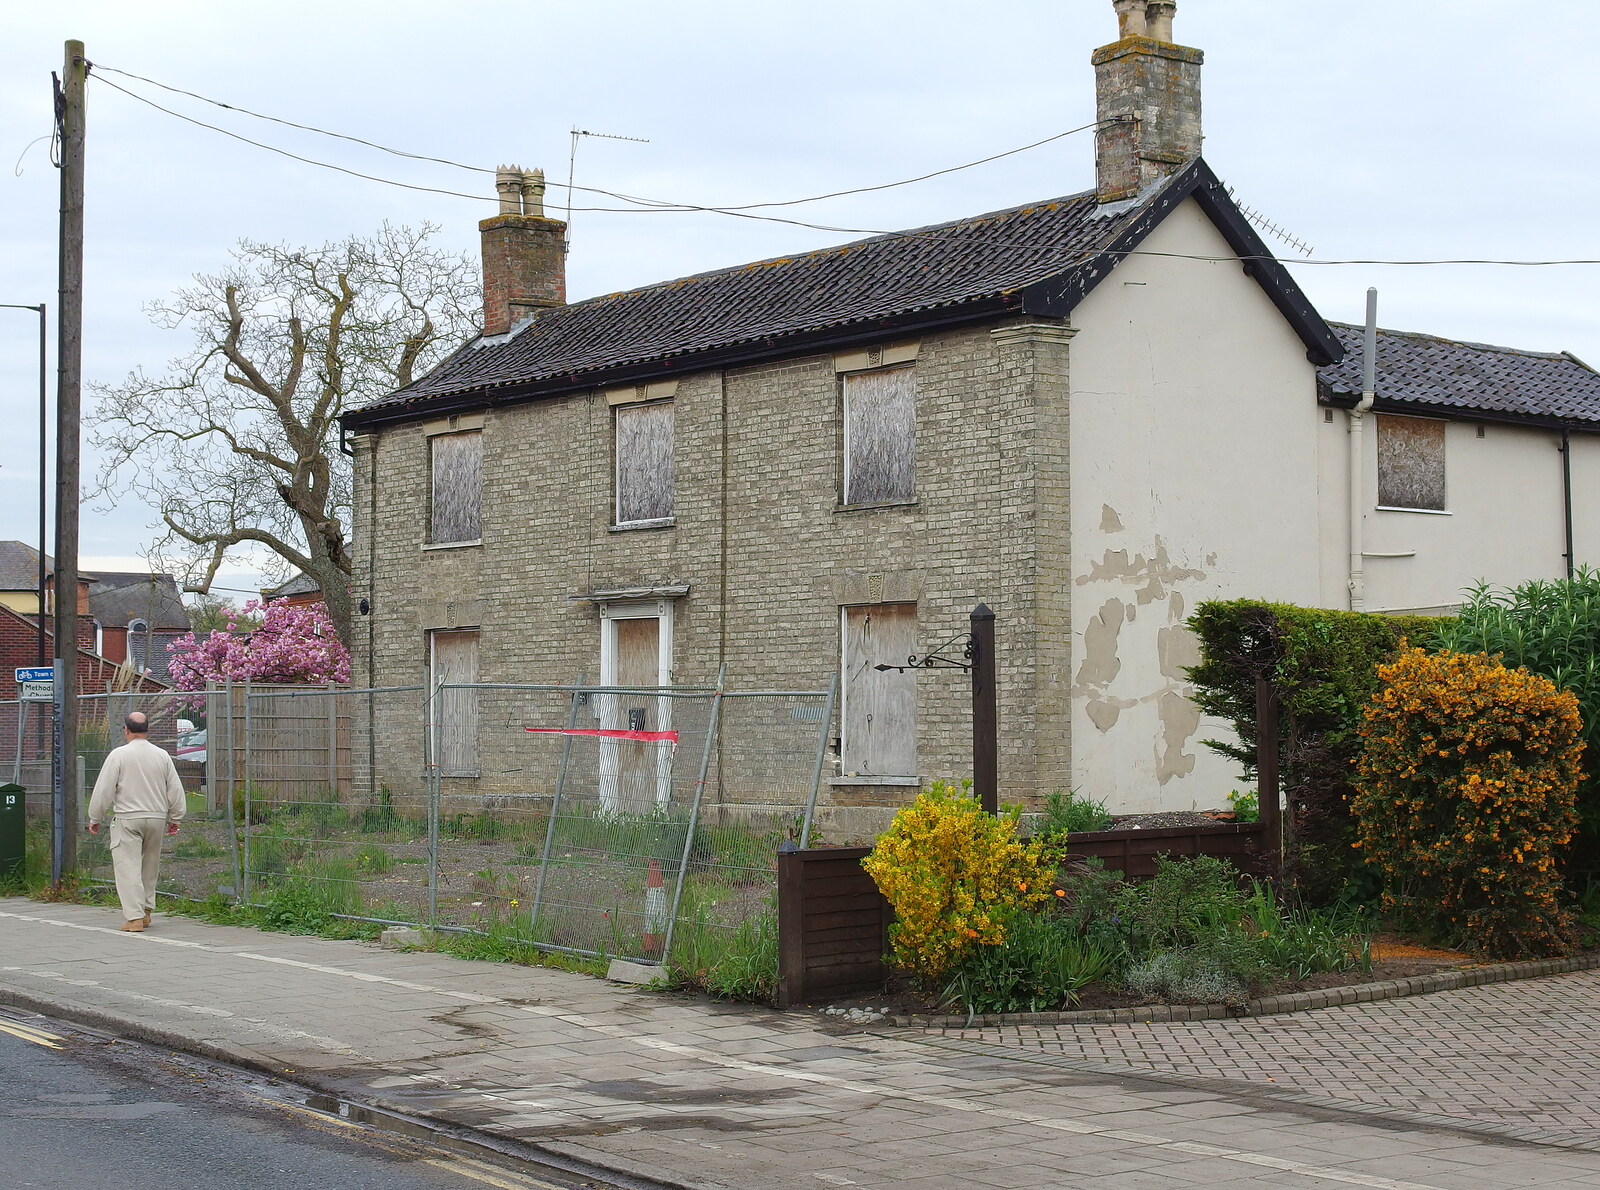 A curiously-derelict house on Victoria Road, Diss from The BSCC at The Black Horse, and an April Miscellany, Thorndon, Diss and Eye, Suffolk - 10th April 2014